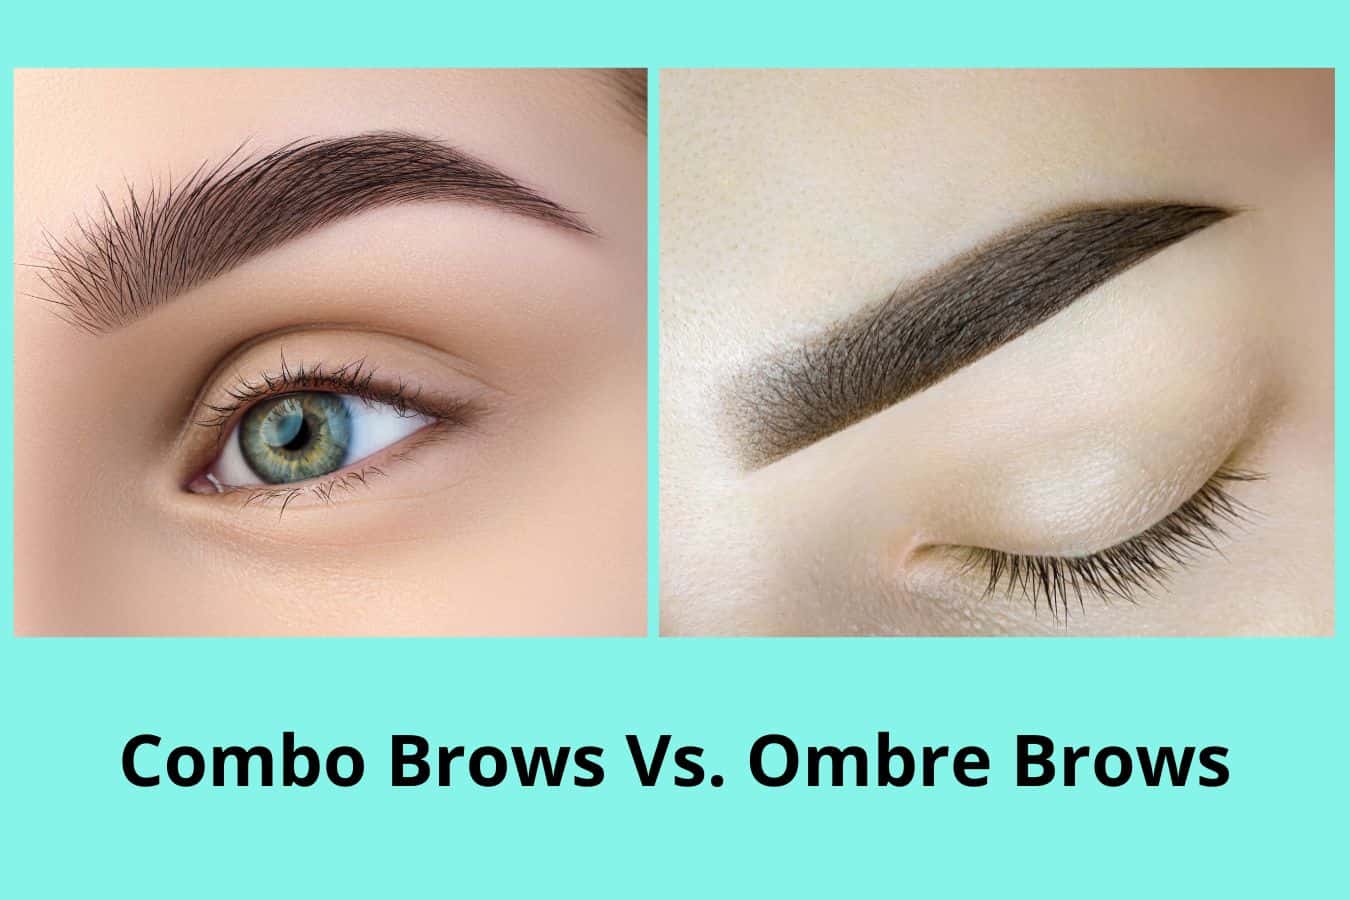 Combo Brows Vs. Ombre Brows